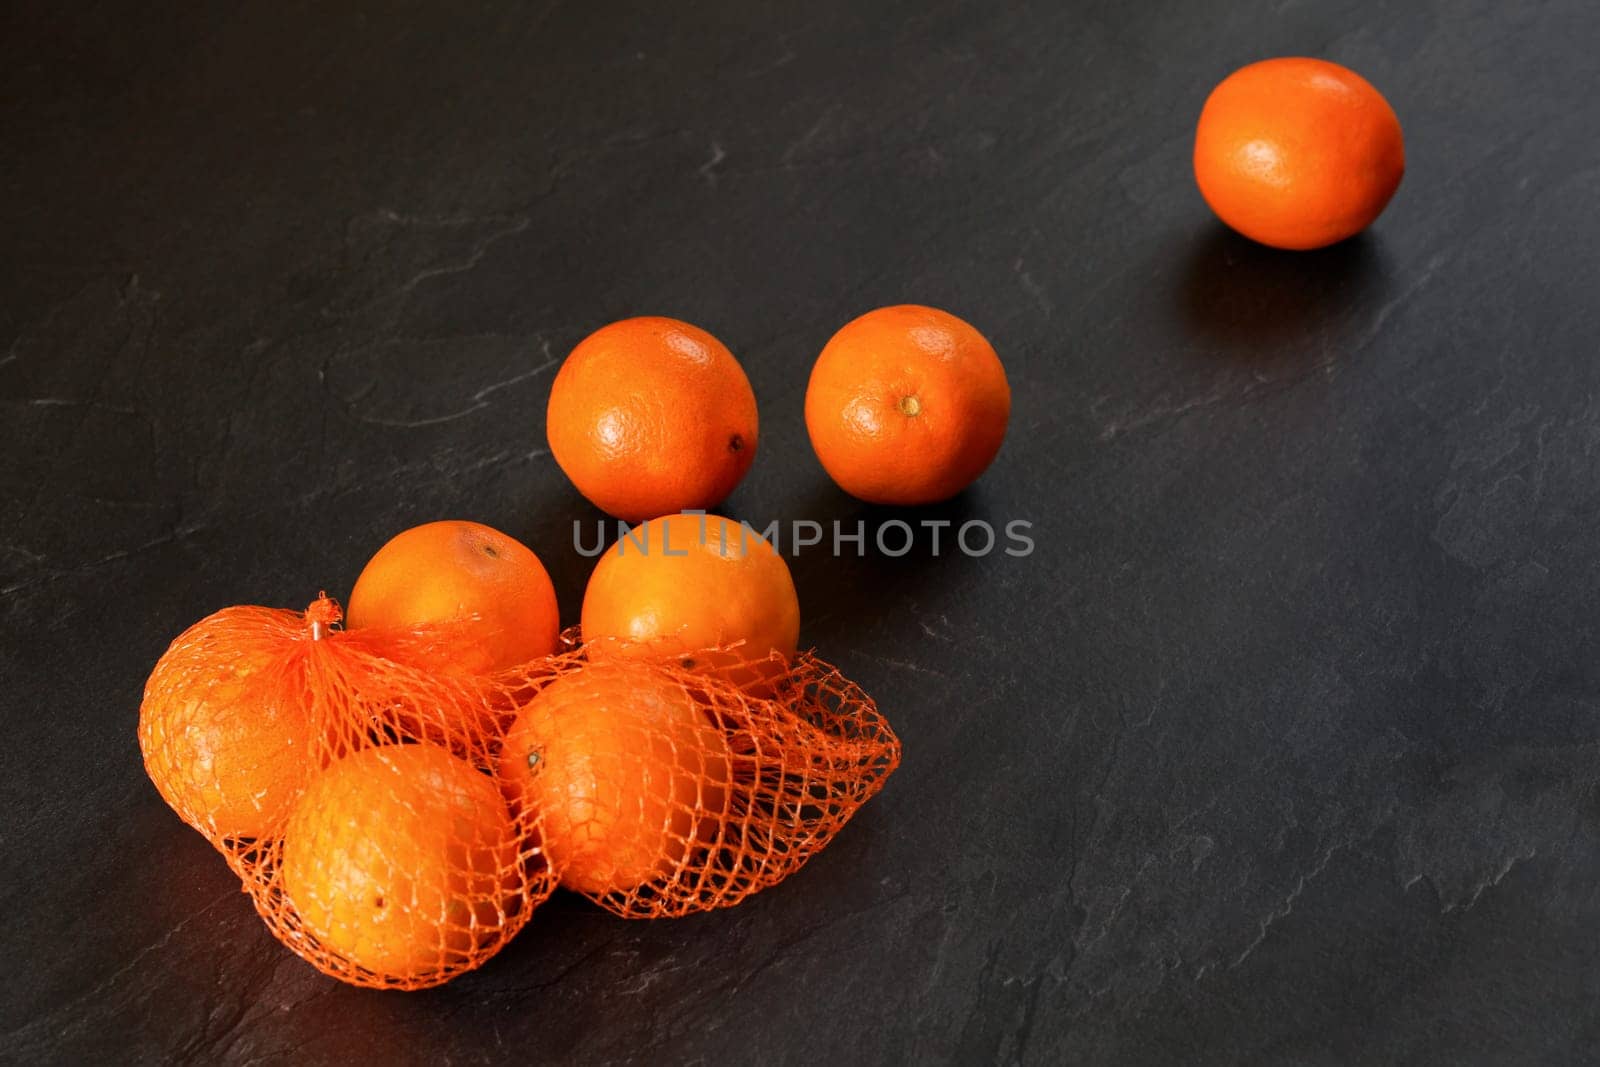 Oranges in red plastic net, some scattered on black stone like board
